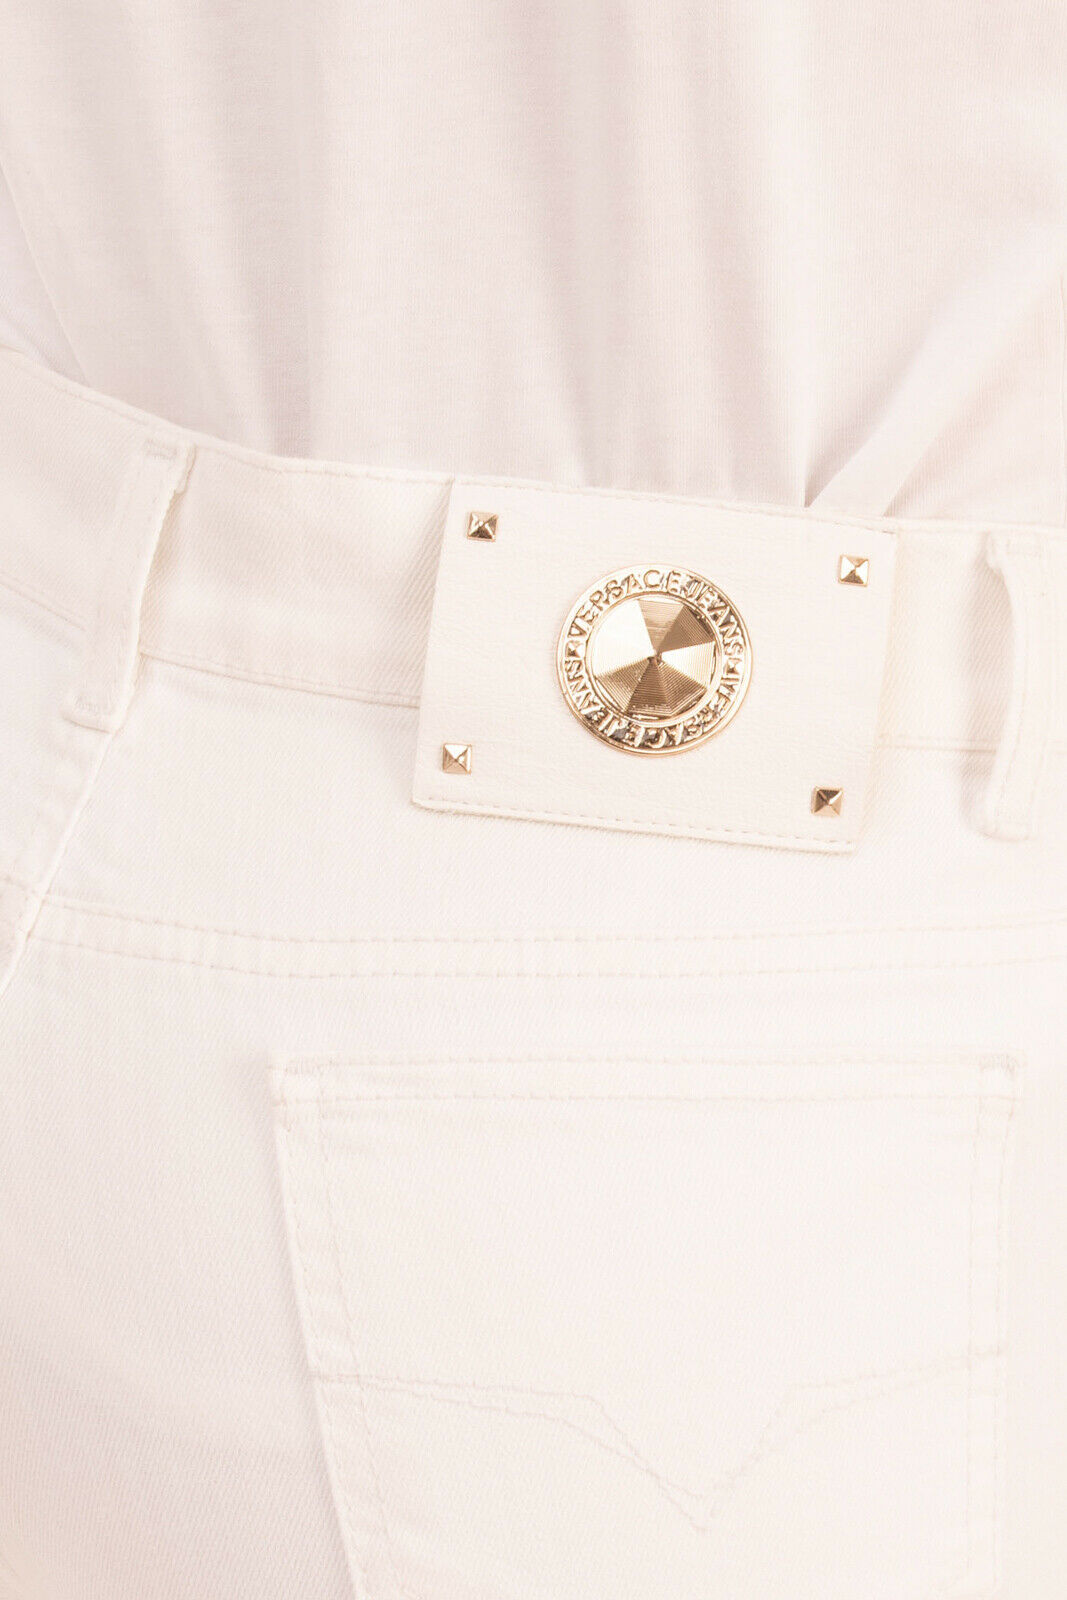 VERSACE JEANS Ivory Jeans Size 28 Stretch Made in Italy